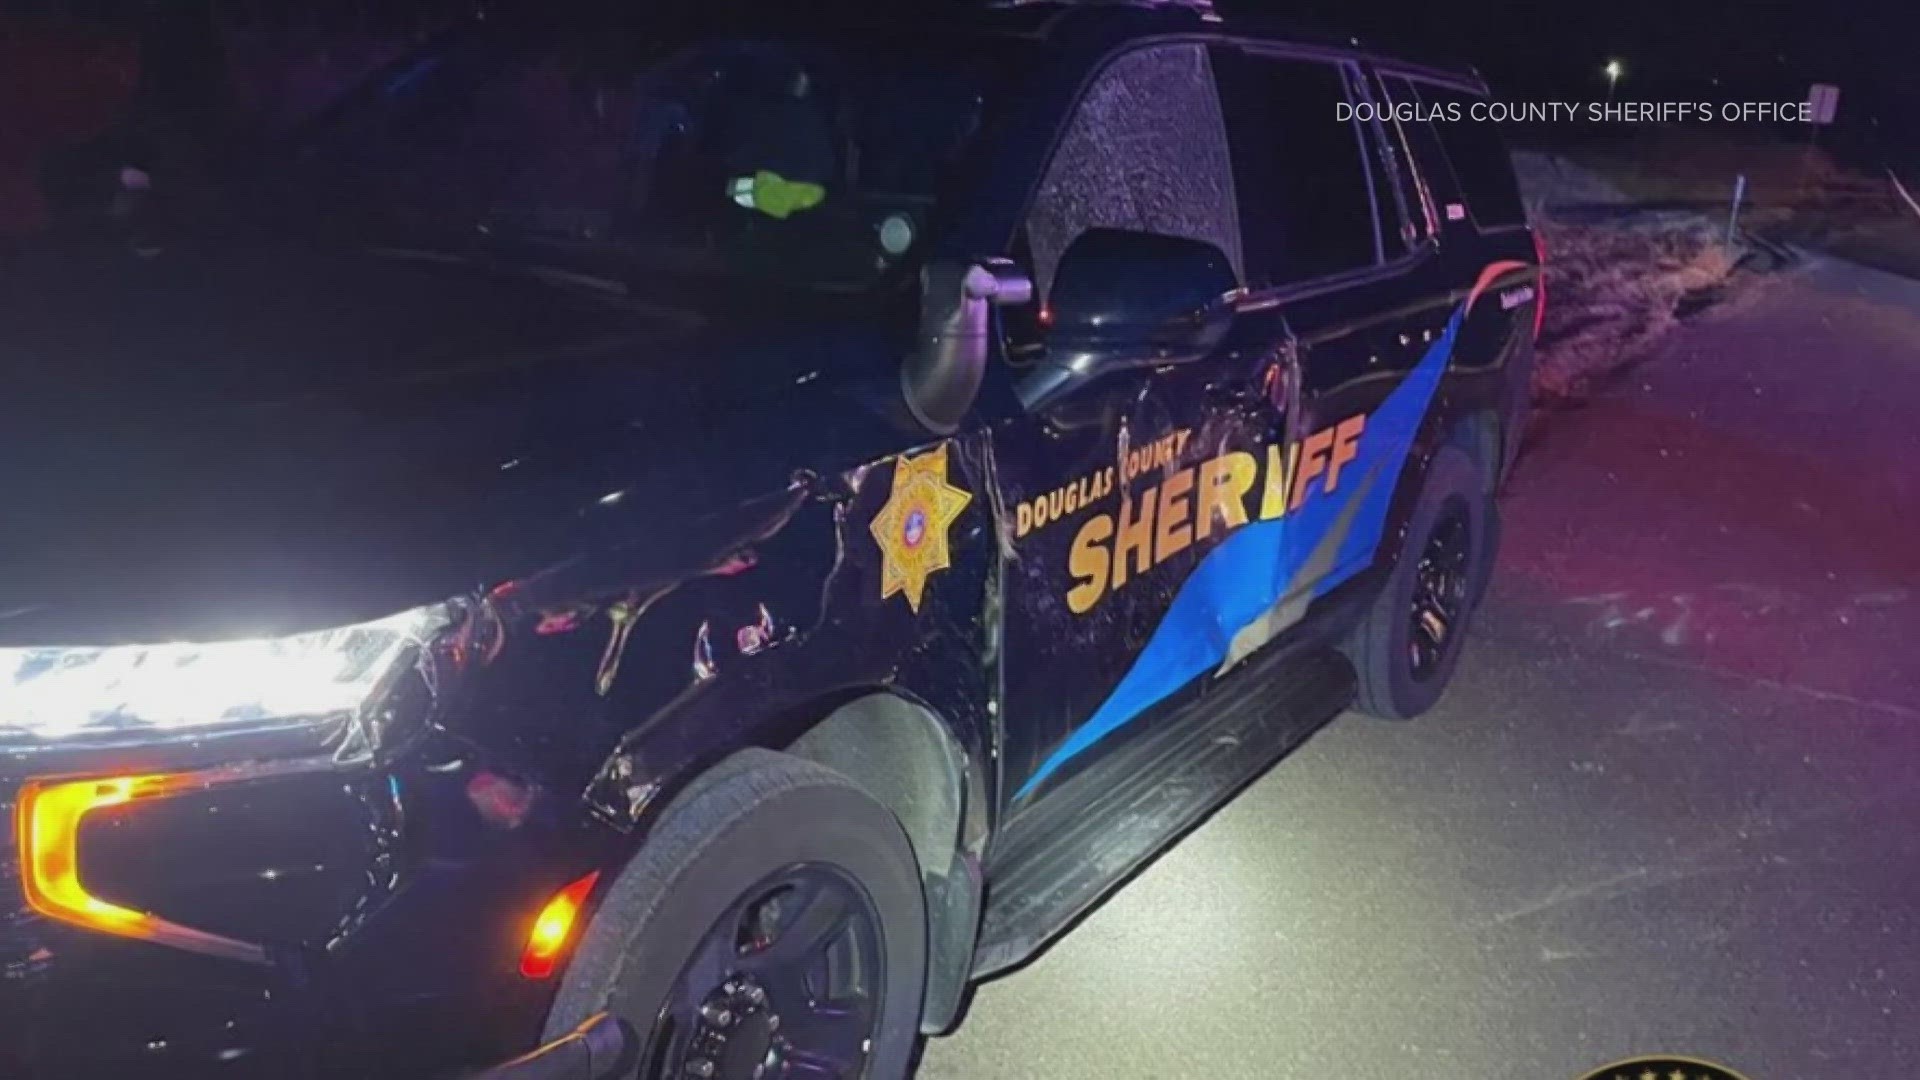 The incident occurred as the deputy was driving down Highway 85 near the town of Sedalia.